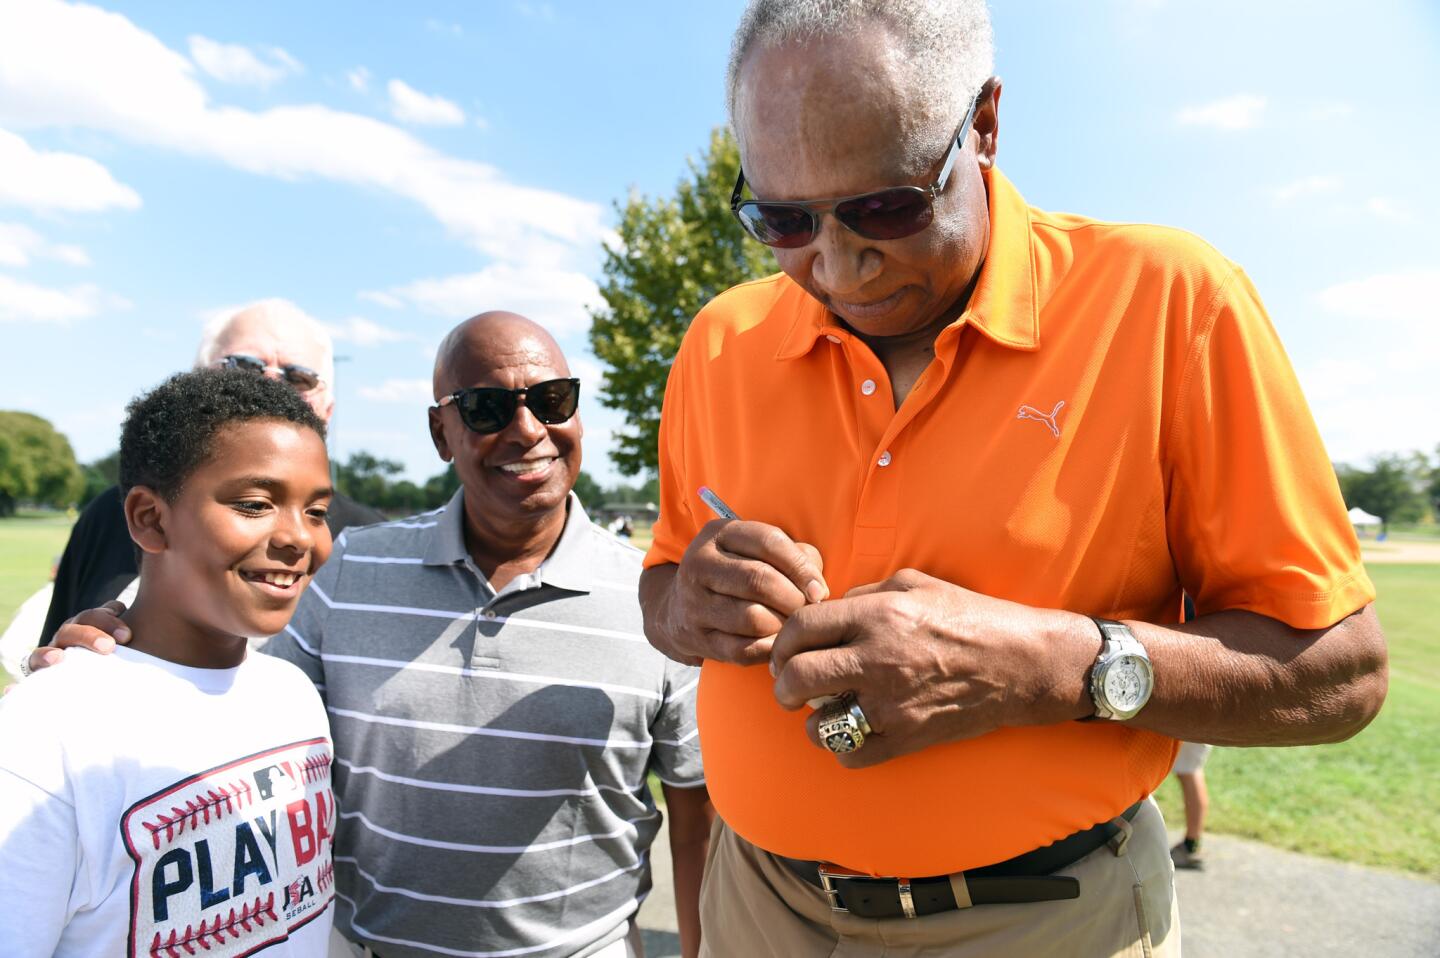 Baltimore, Md.--8/26/15-- Major league Hall of Famer and former Orioles star Frank Robinson, right, autographs a baseball for Jean Zayas, 13, left, during the Play Ball event at Carroll Park on Aug. 26, 2015.